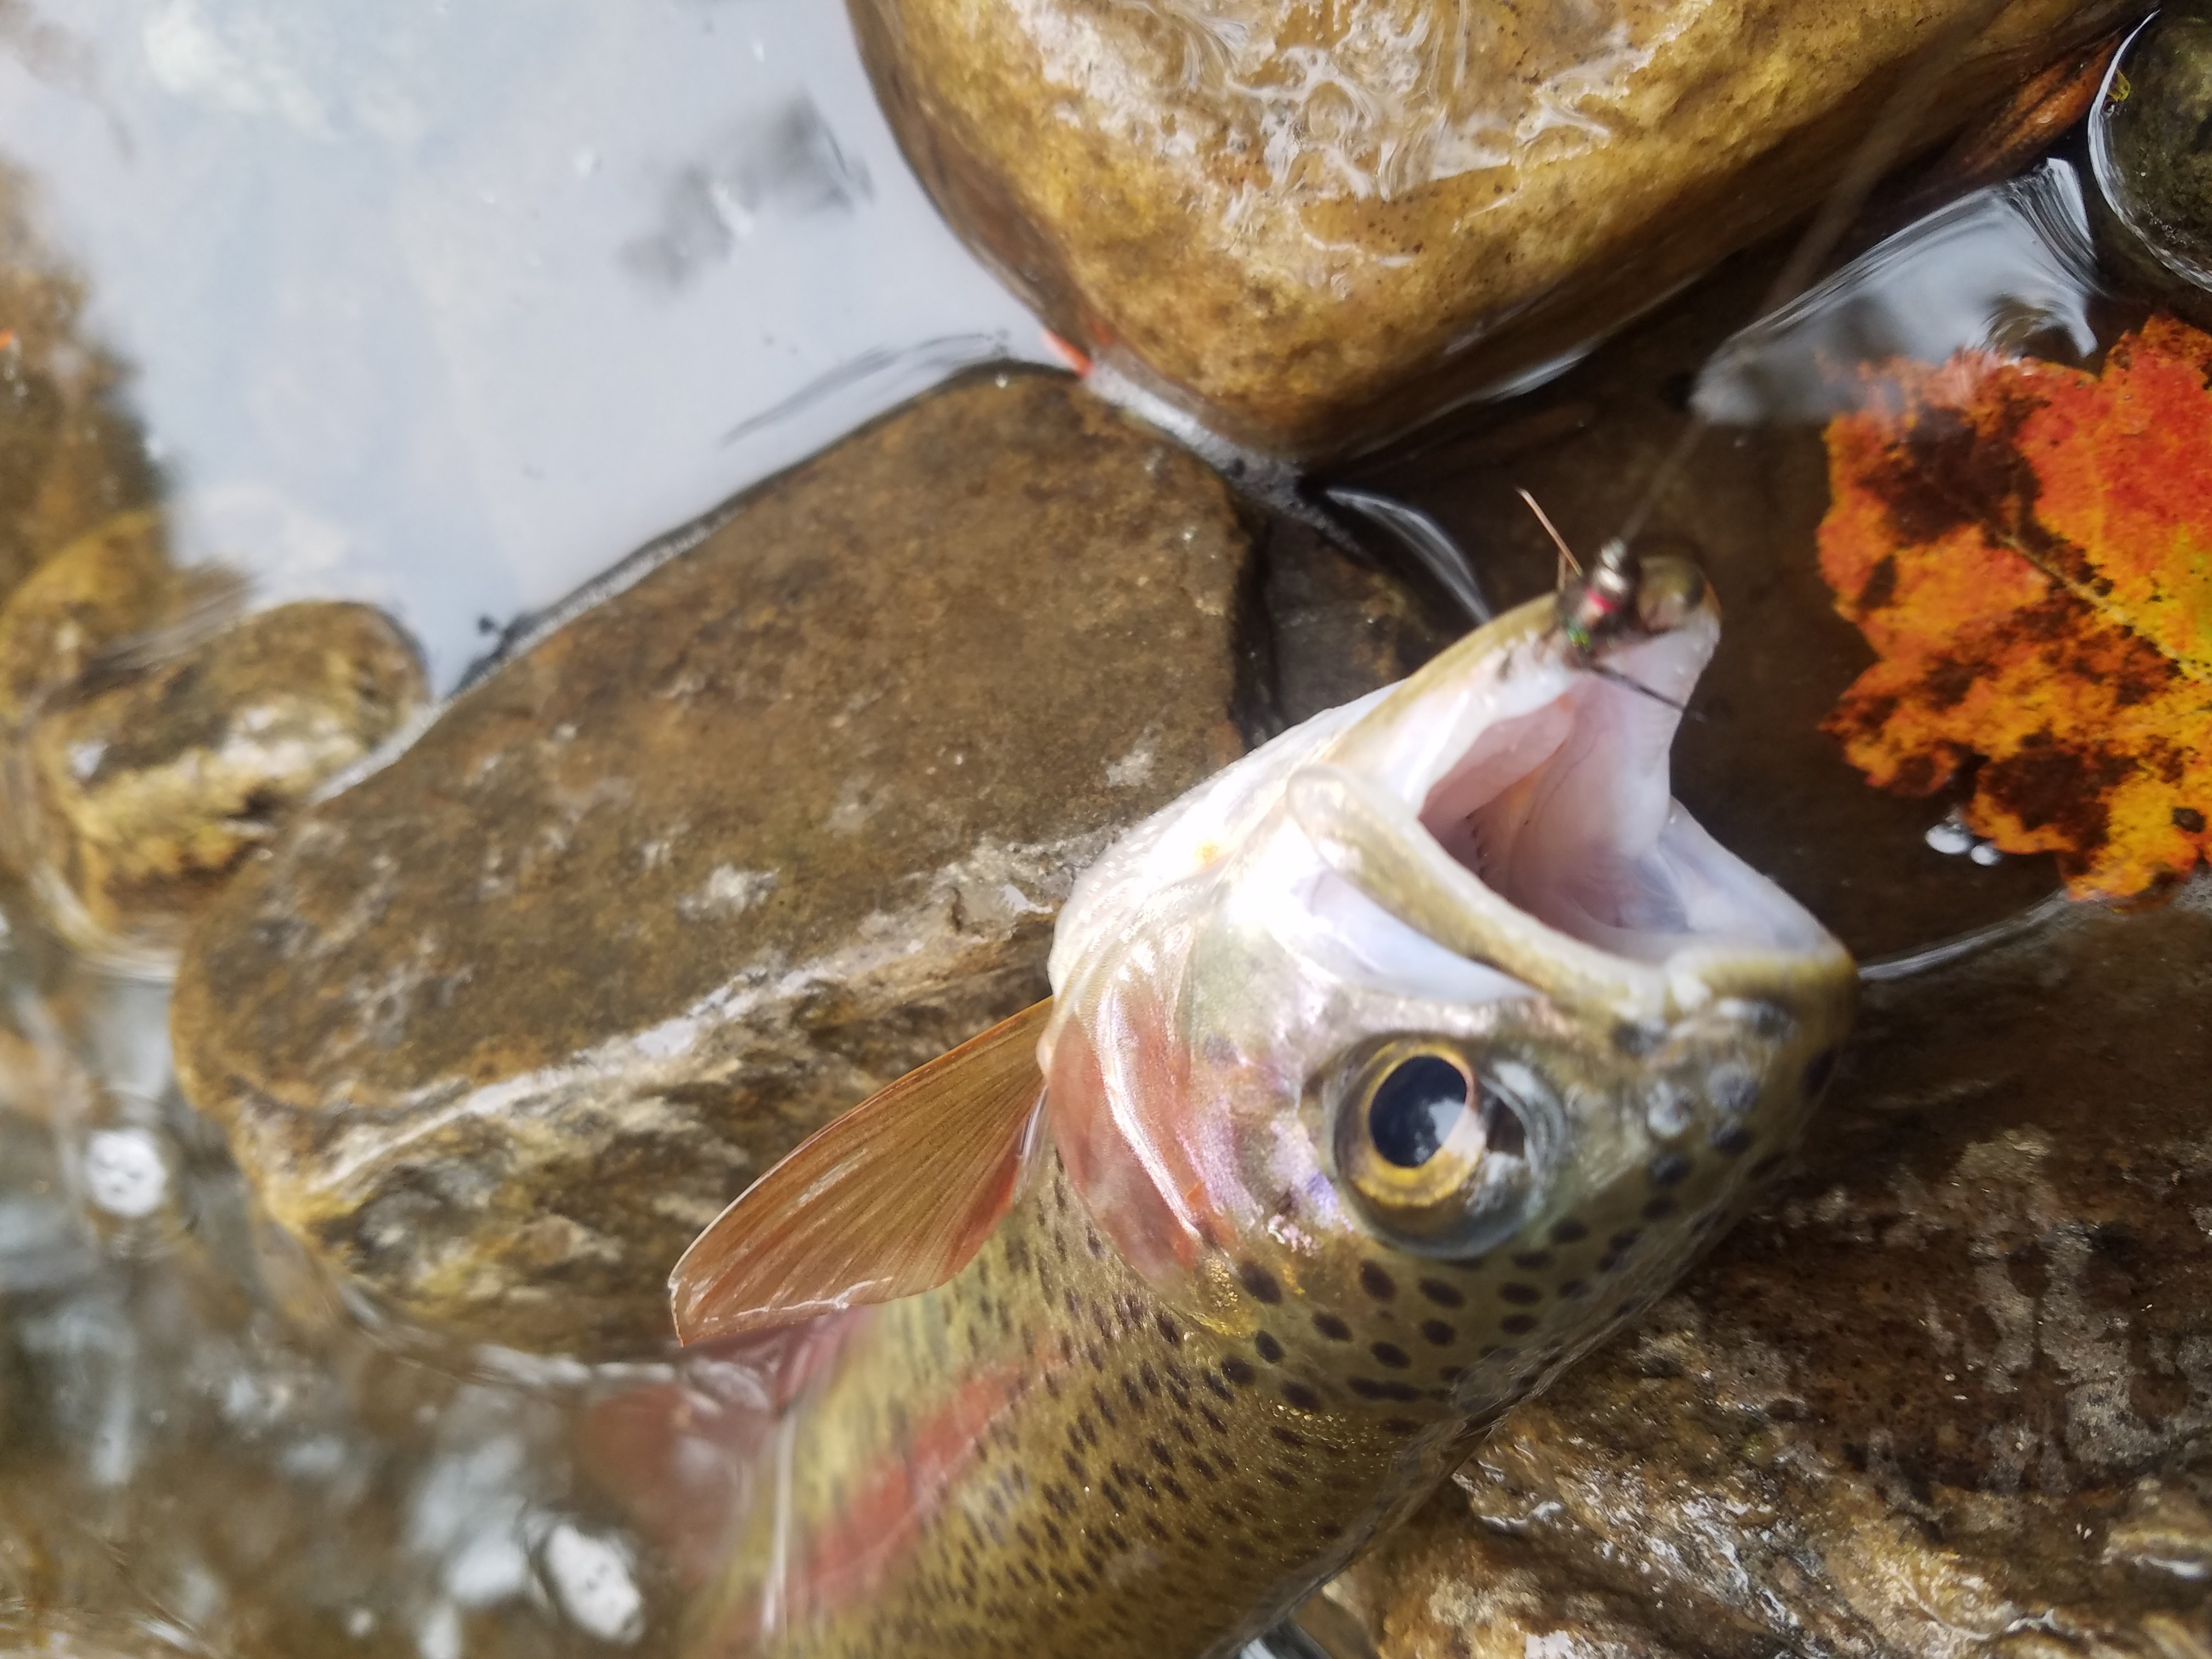 Hydrodynamic Dozen – Fly Fishing Hot Spots in the Tennessee River Valley -  Coastal Angler & The Angler Magazine